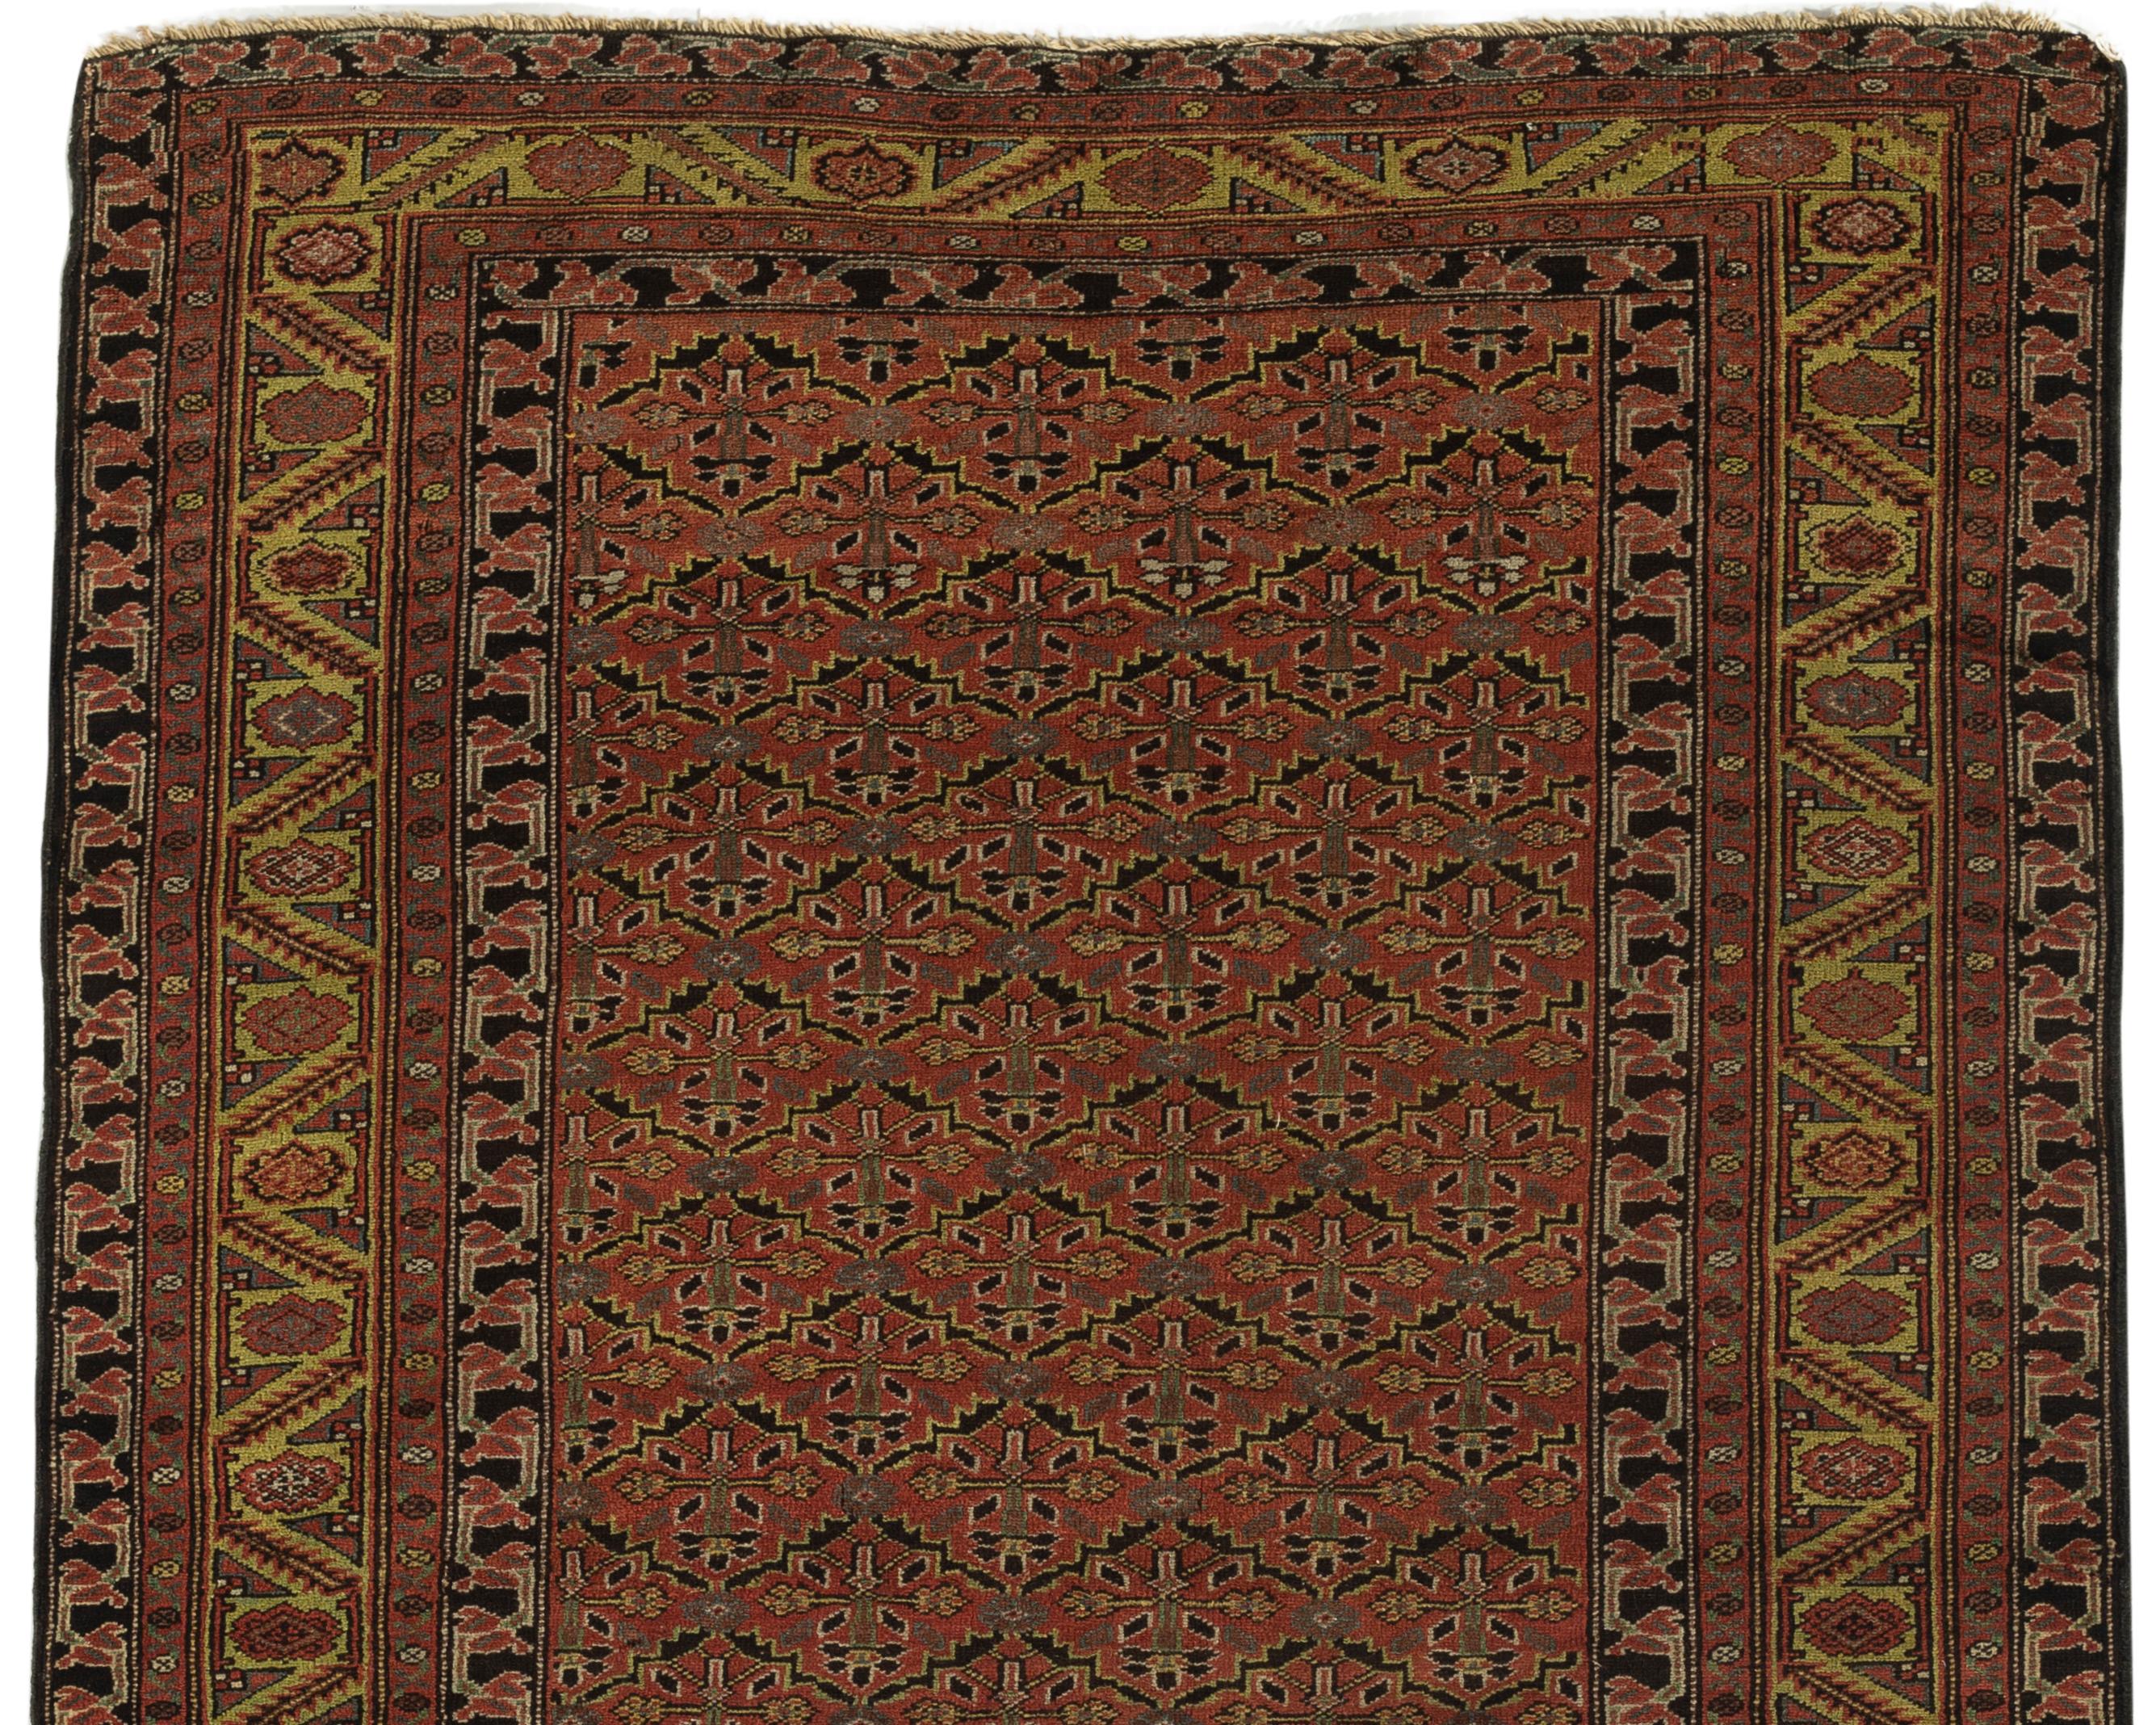 Antique Persian Malayer rug, circa 1880. Antique rugs from Malayer, east of Hamadan, could be considered top quality Hamadan’s and they share similar structural aspects. This lovely small scatter rug filled with floral designs surrounded by multiple